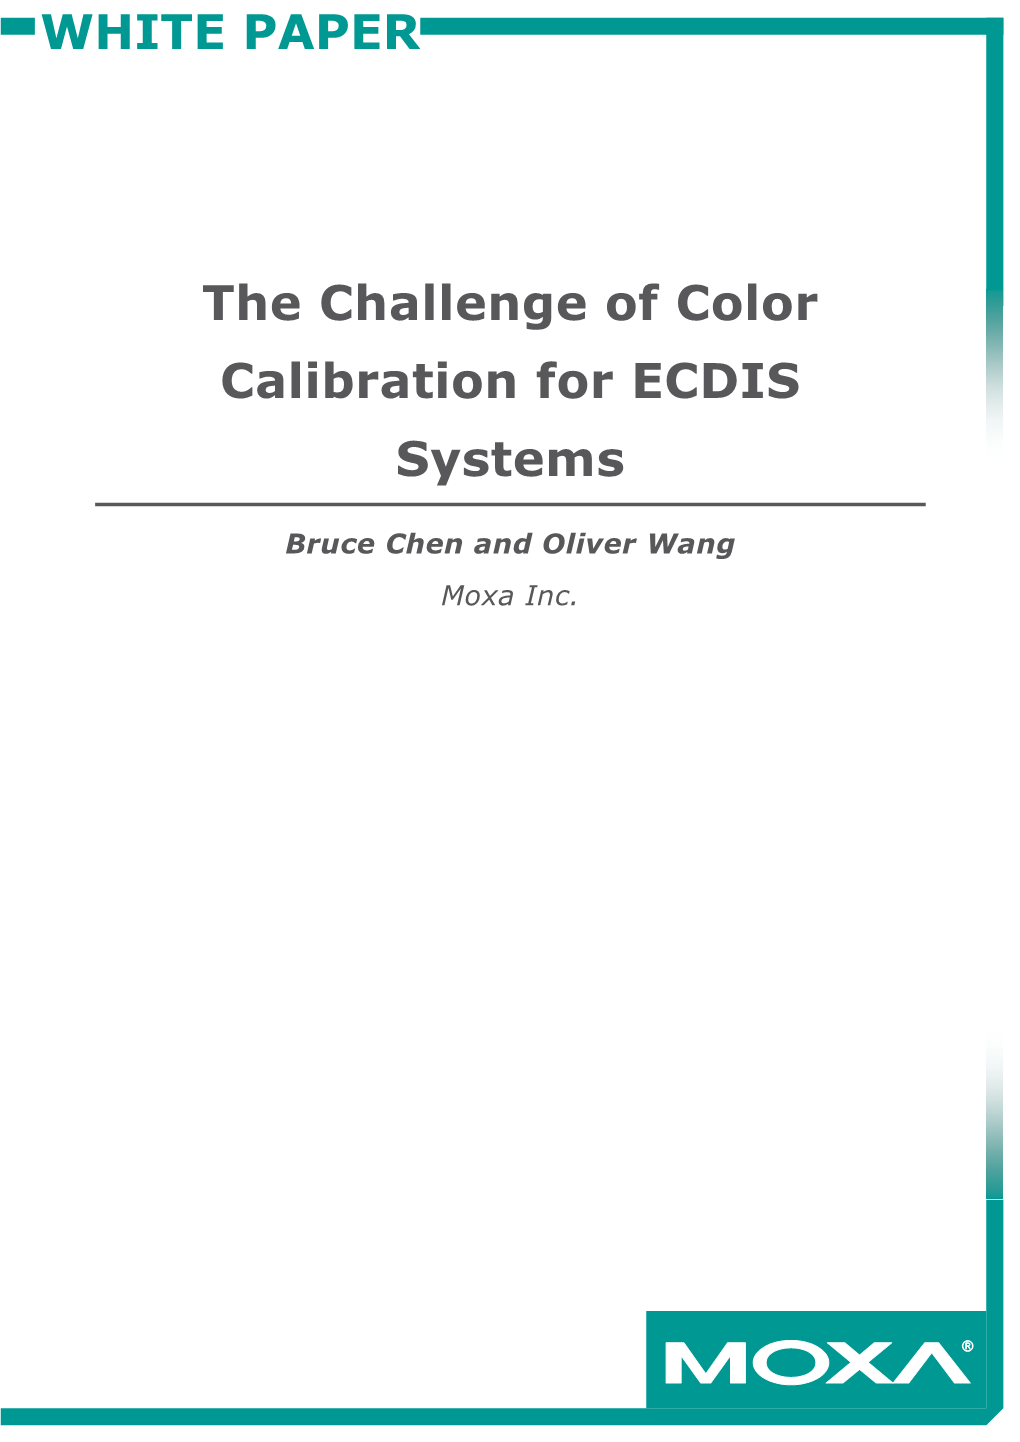 The Challenge of Color Calibration for ECDIS Systems